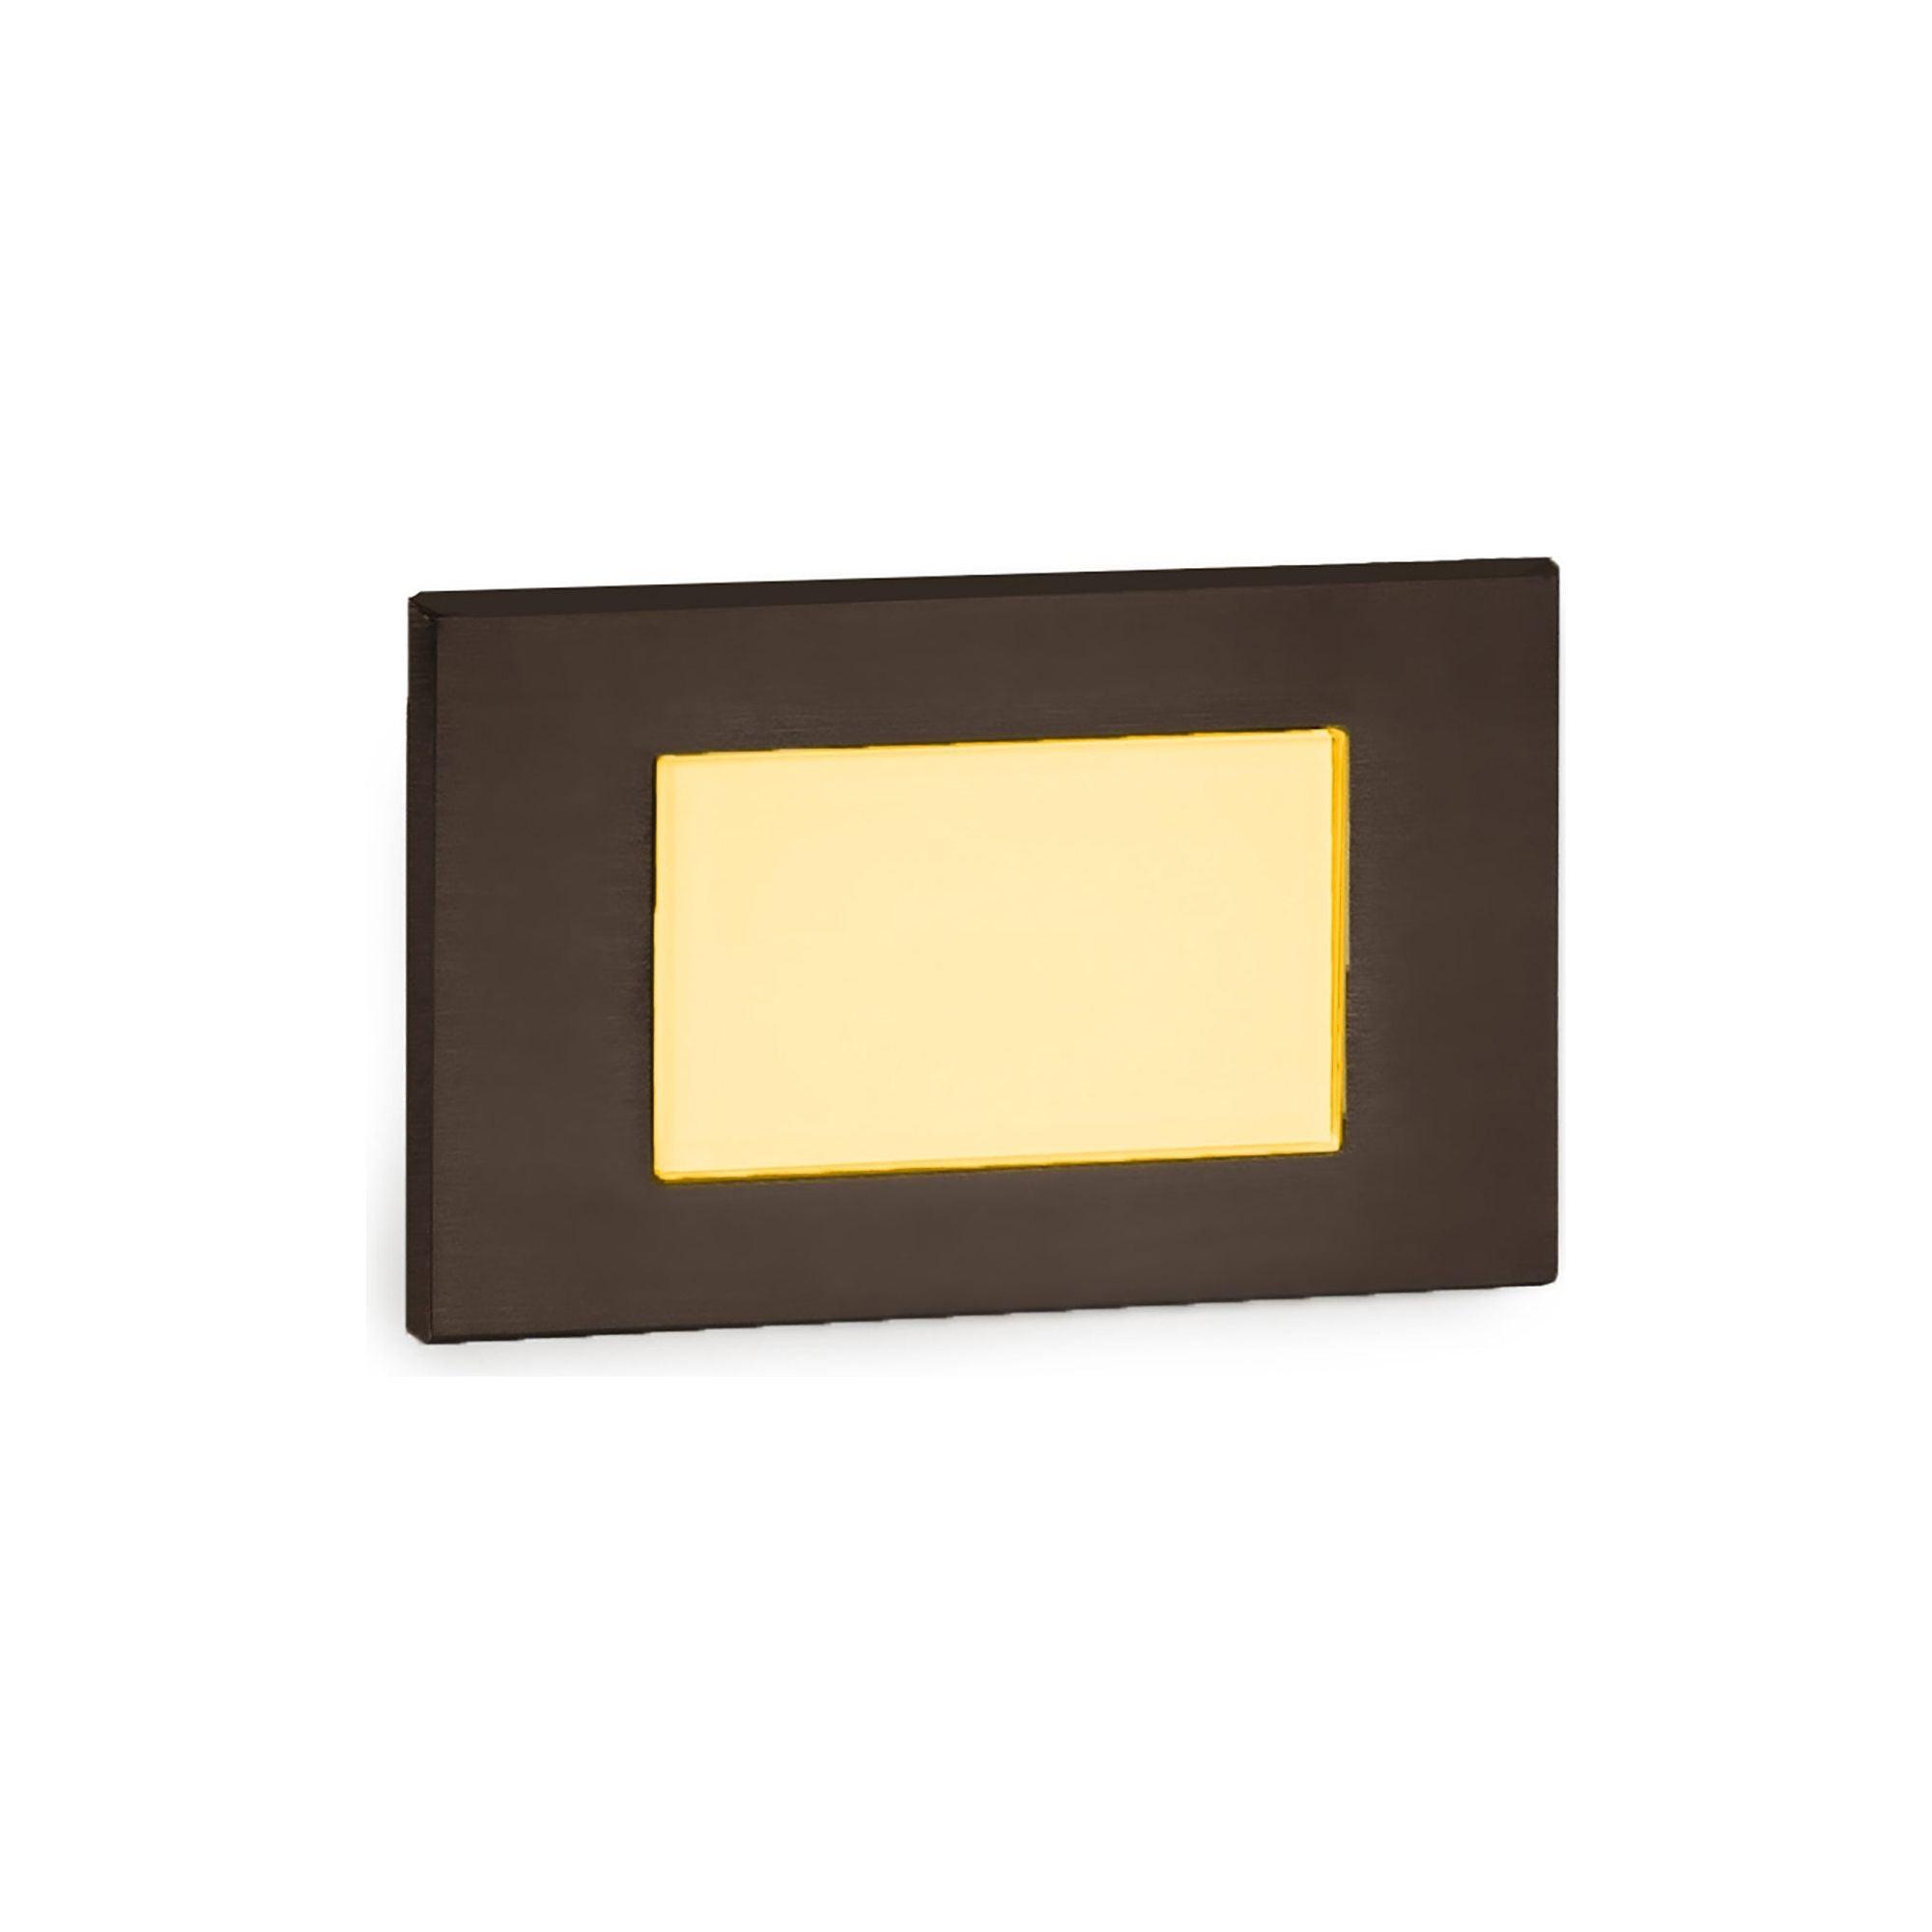 WAC Lighting - LEDme 120V LED Horizontal Diffused Indoor/Outdoor Step and Wall Light - Lights Canada